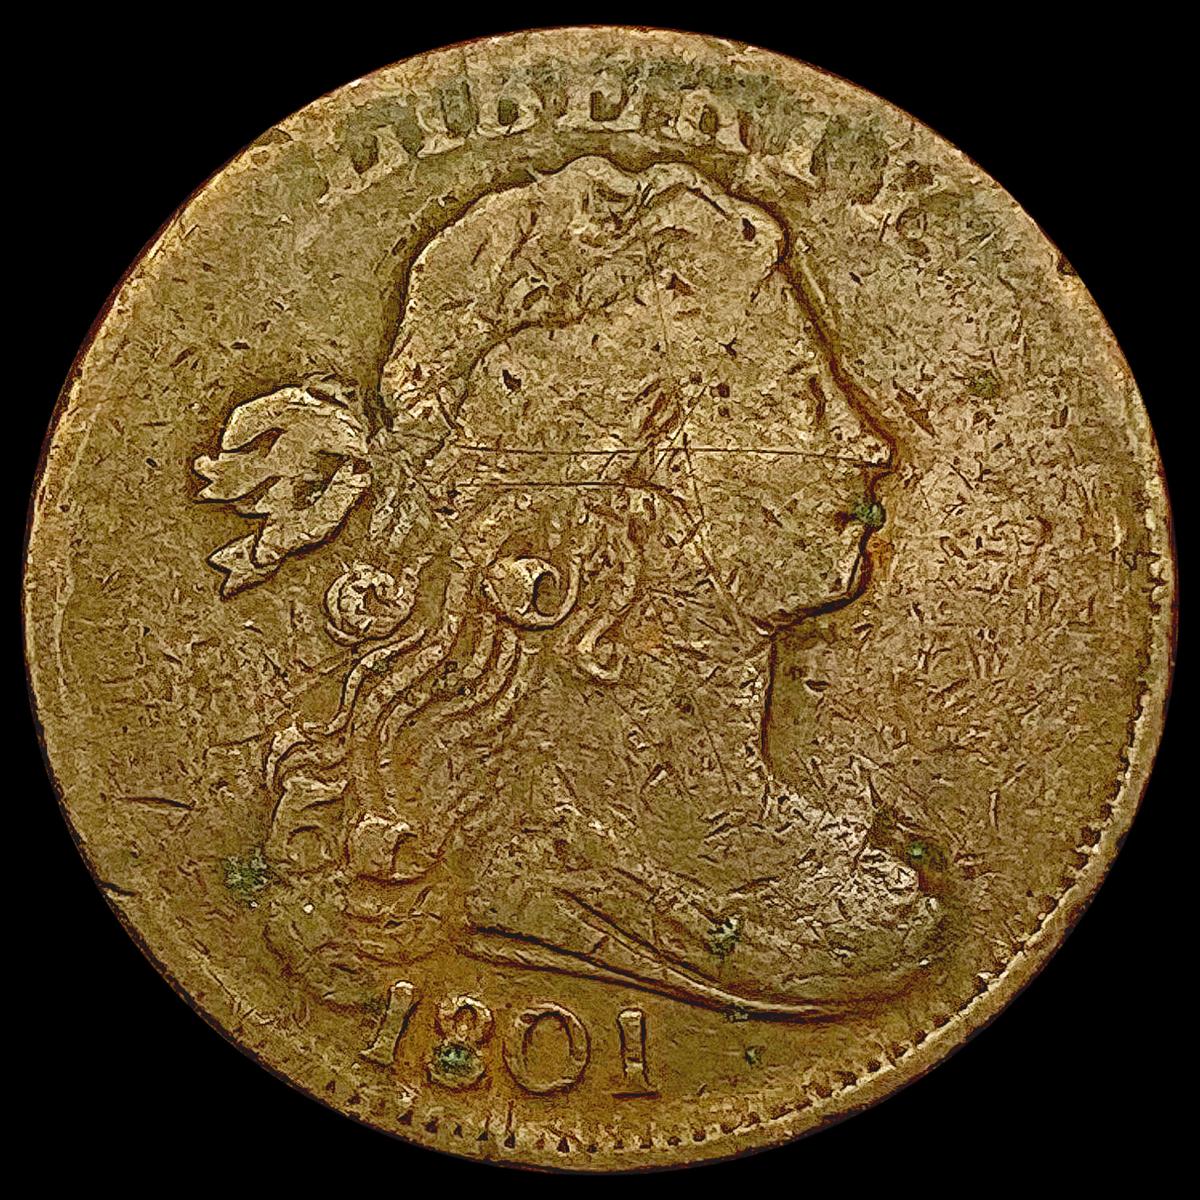 1801 Draped Bust Large Cent NICELY CIRCULATED